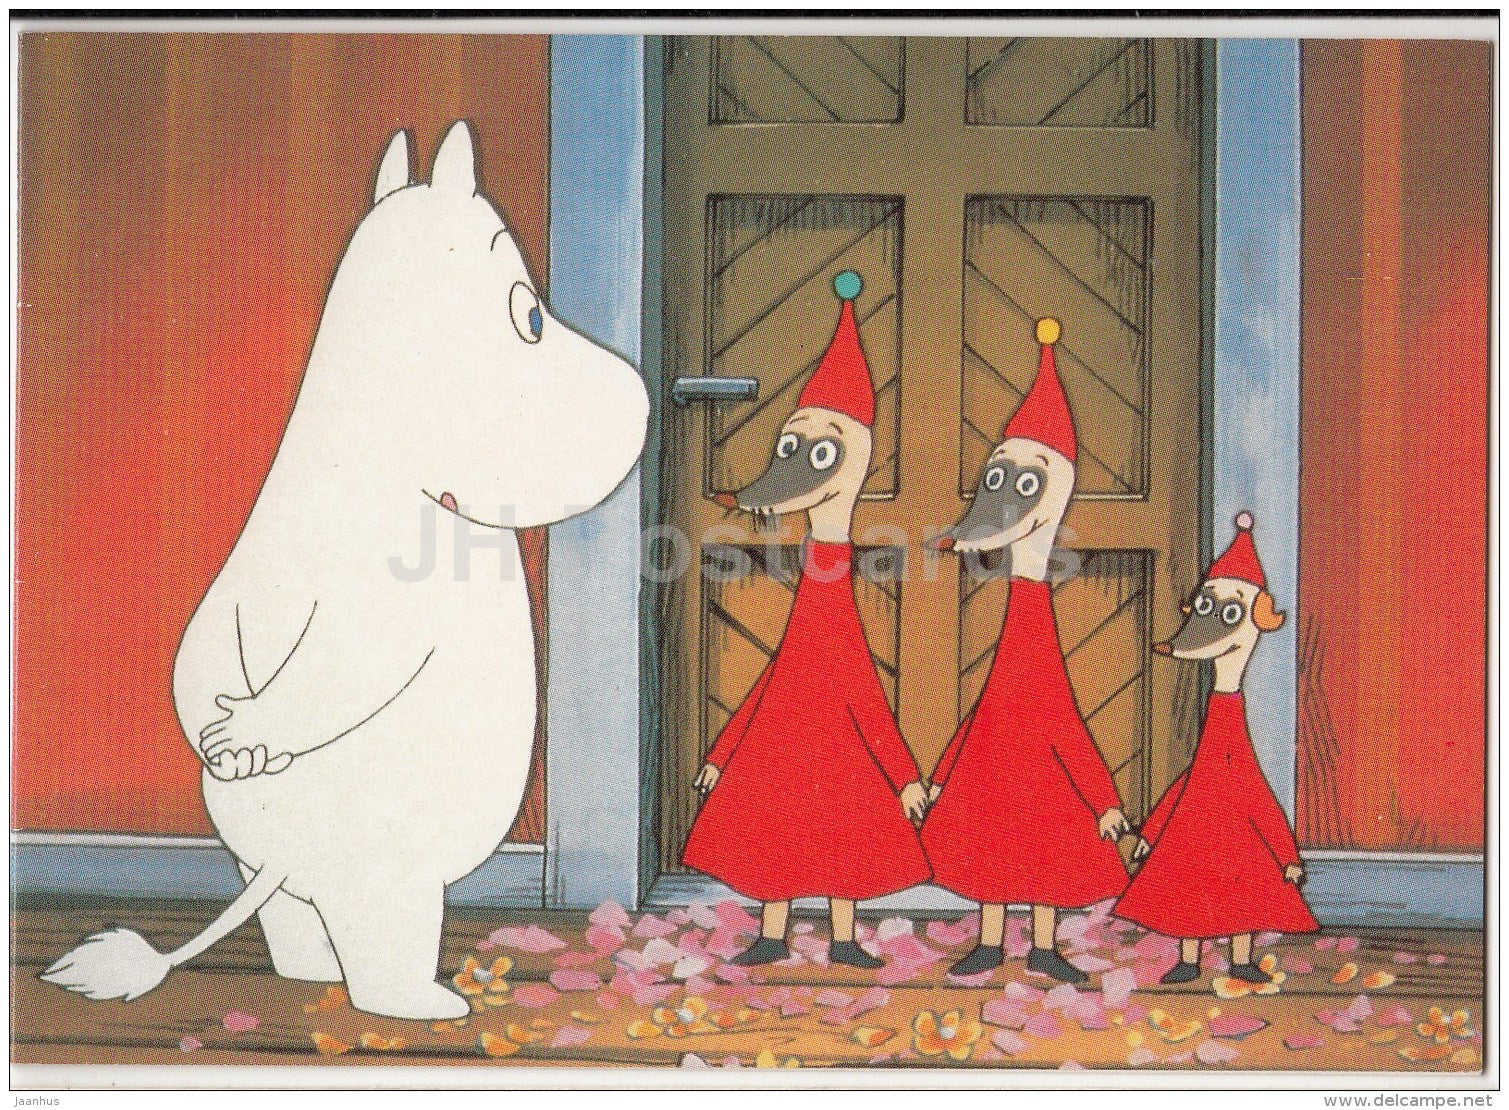 MOOMIN - TALES FROM MOOMINVALLEY